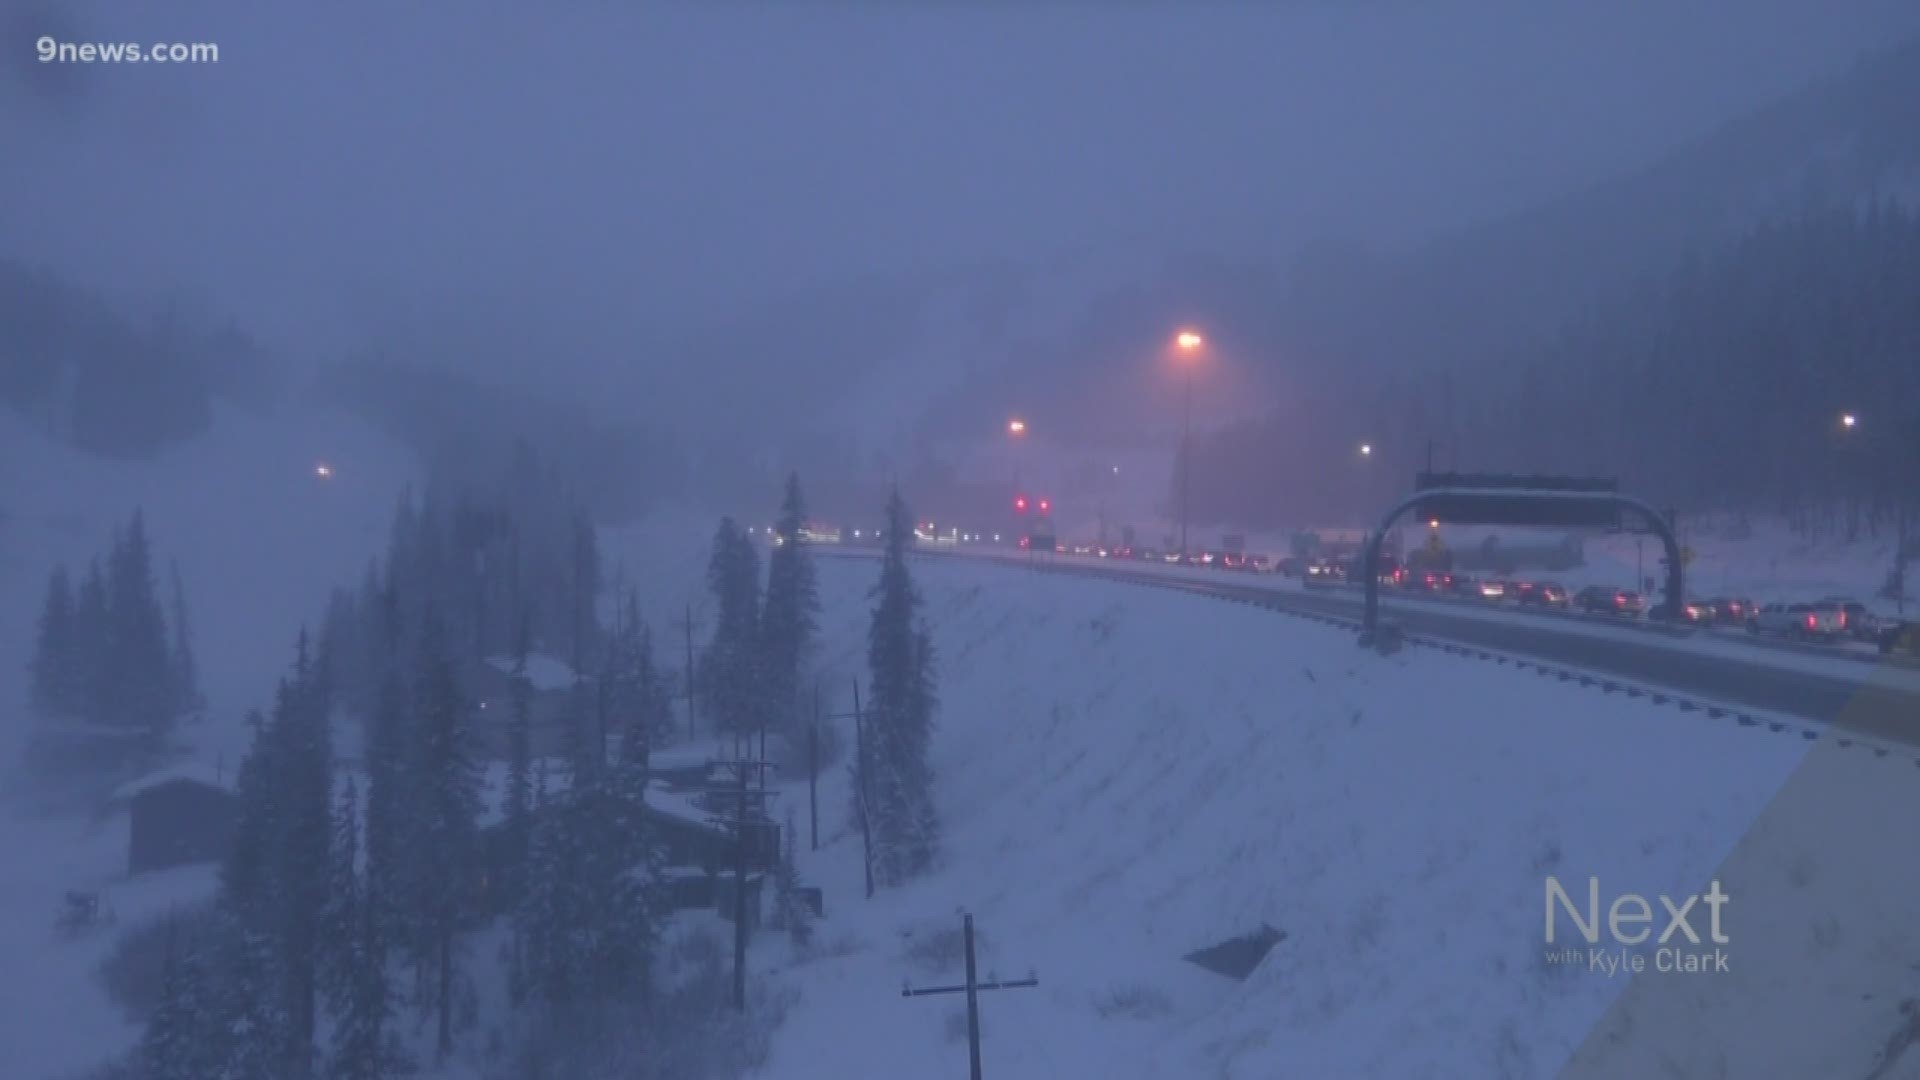 Colorado's new traction law designed to keep I-70 open in the snow got another test. Spoiler alert: It didn't work.